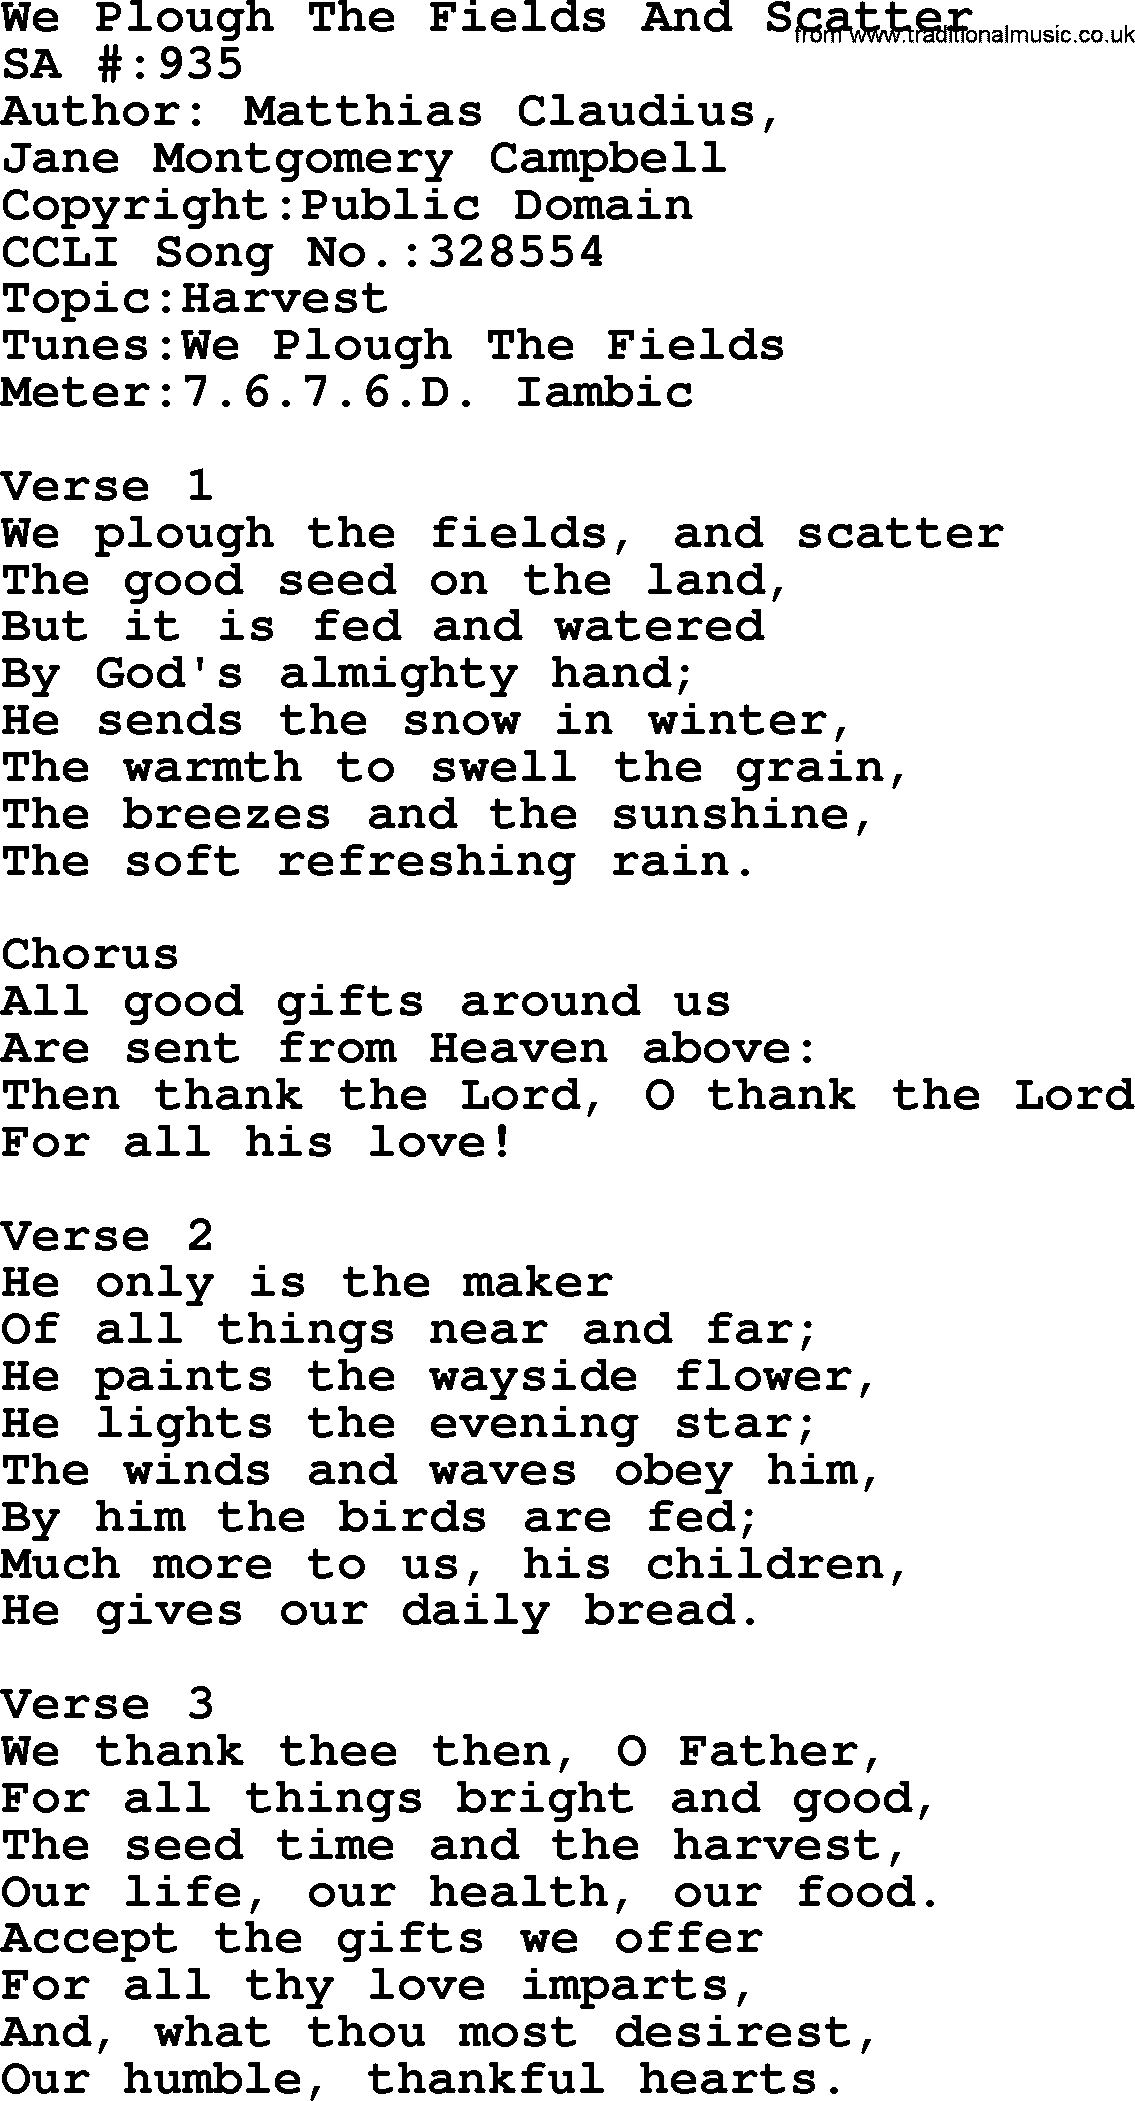 Salvation Army Hymnal, title: We Plough The Fields And Scatter, with lyrics and PDF,